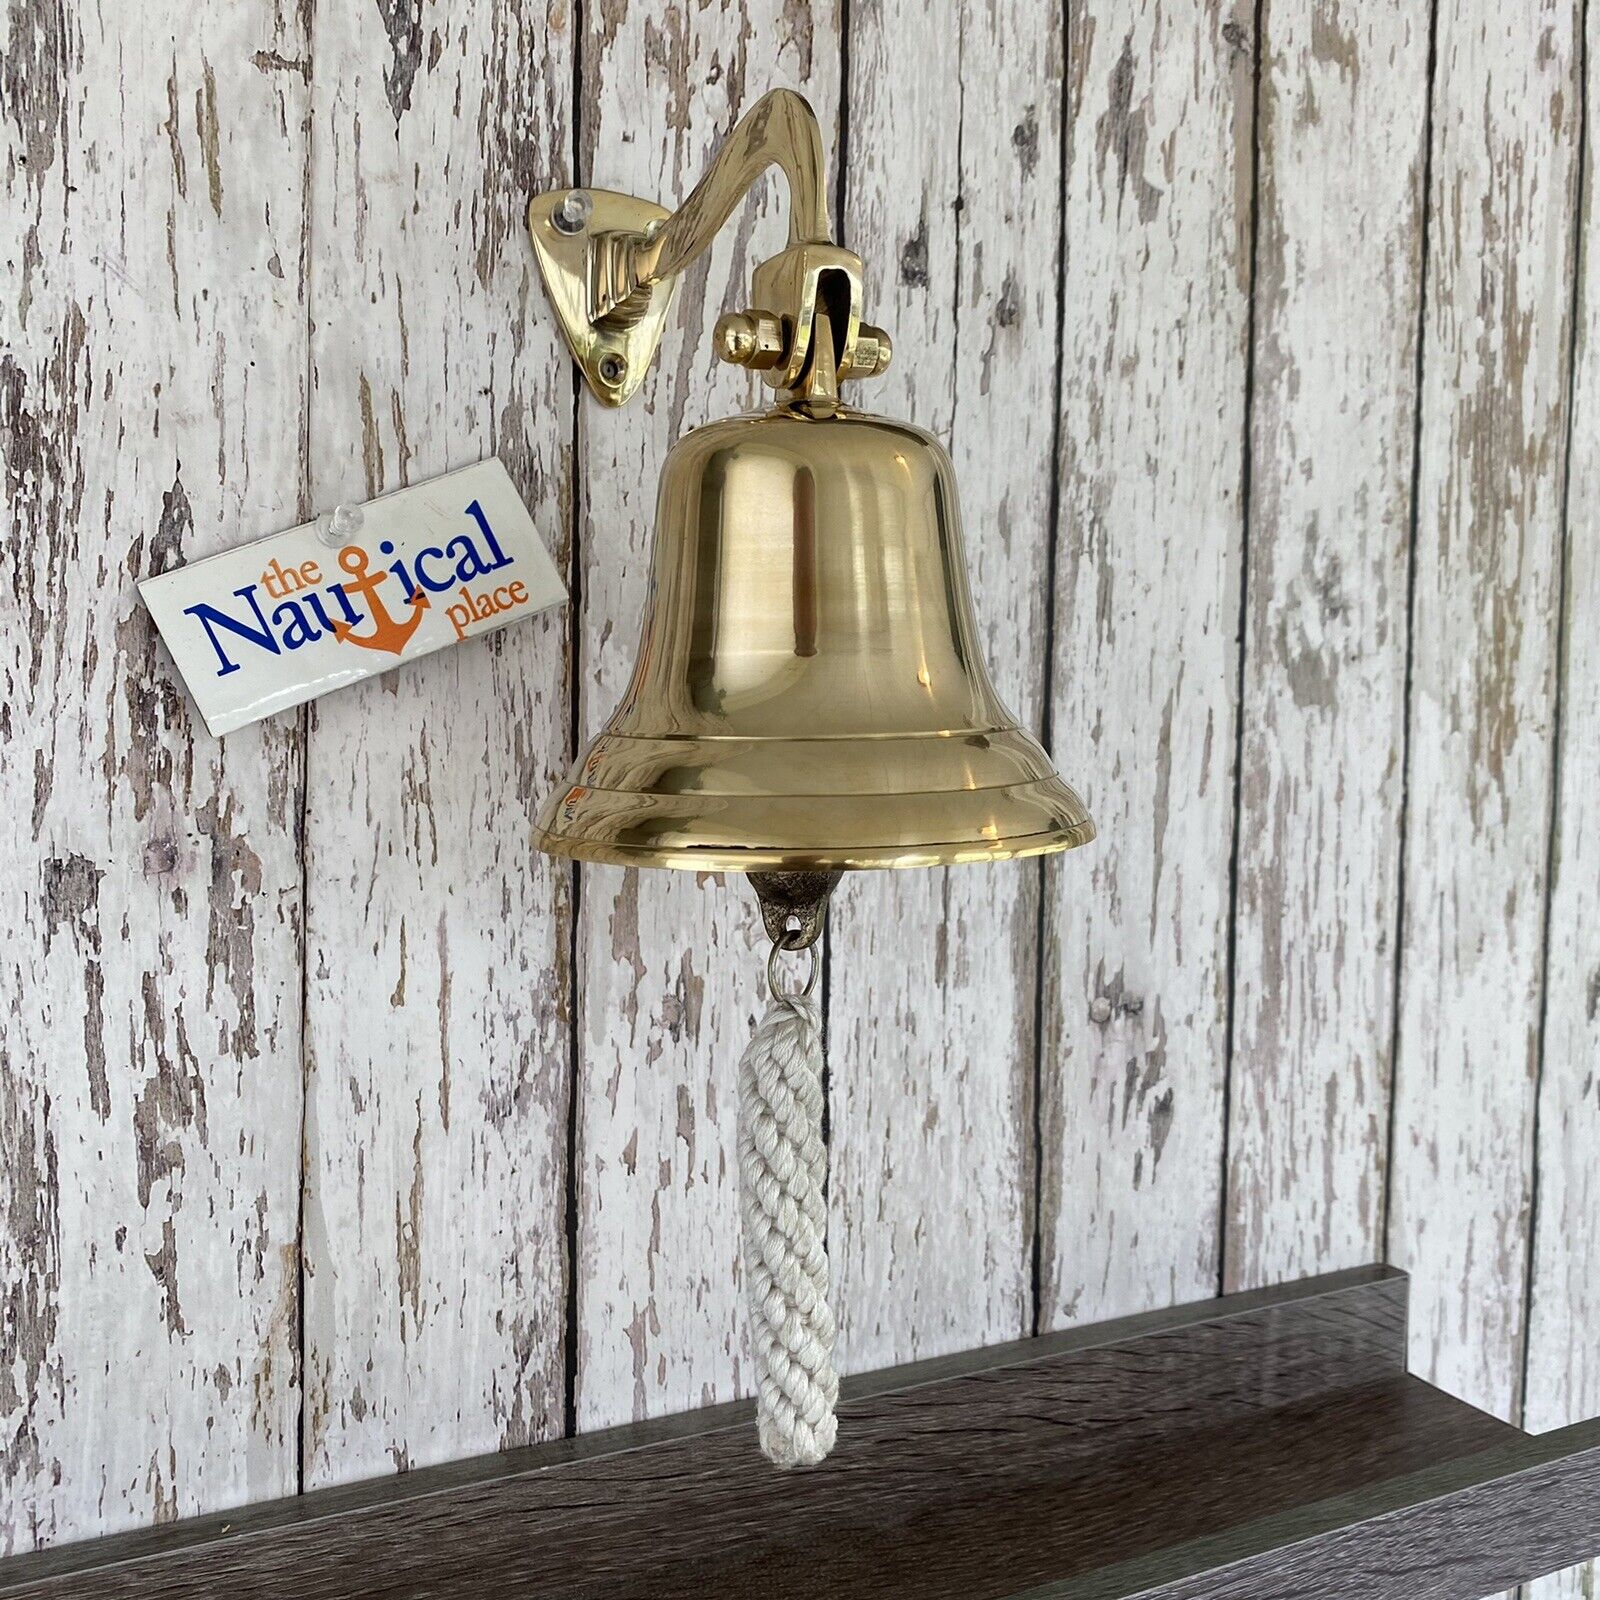 Deluxe Brass Ship Bell w/ Rope Lanyard ~  ~Nautical Maritime Wall Boat Decor 